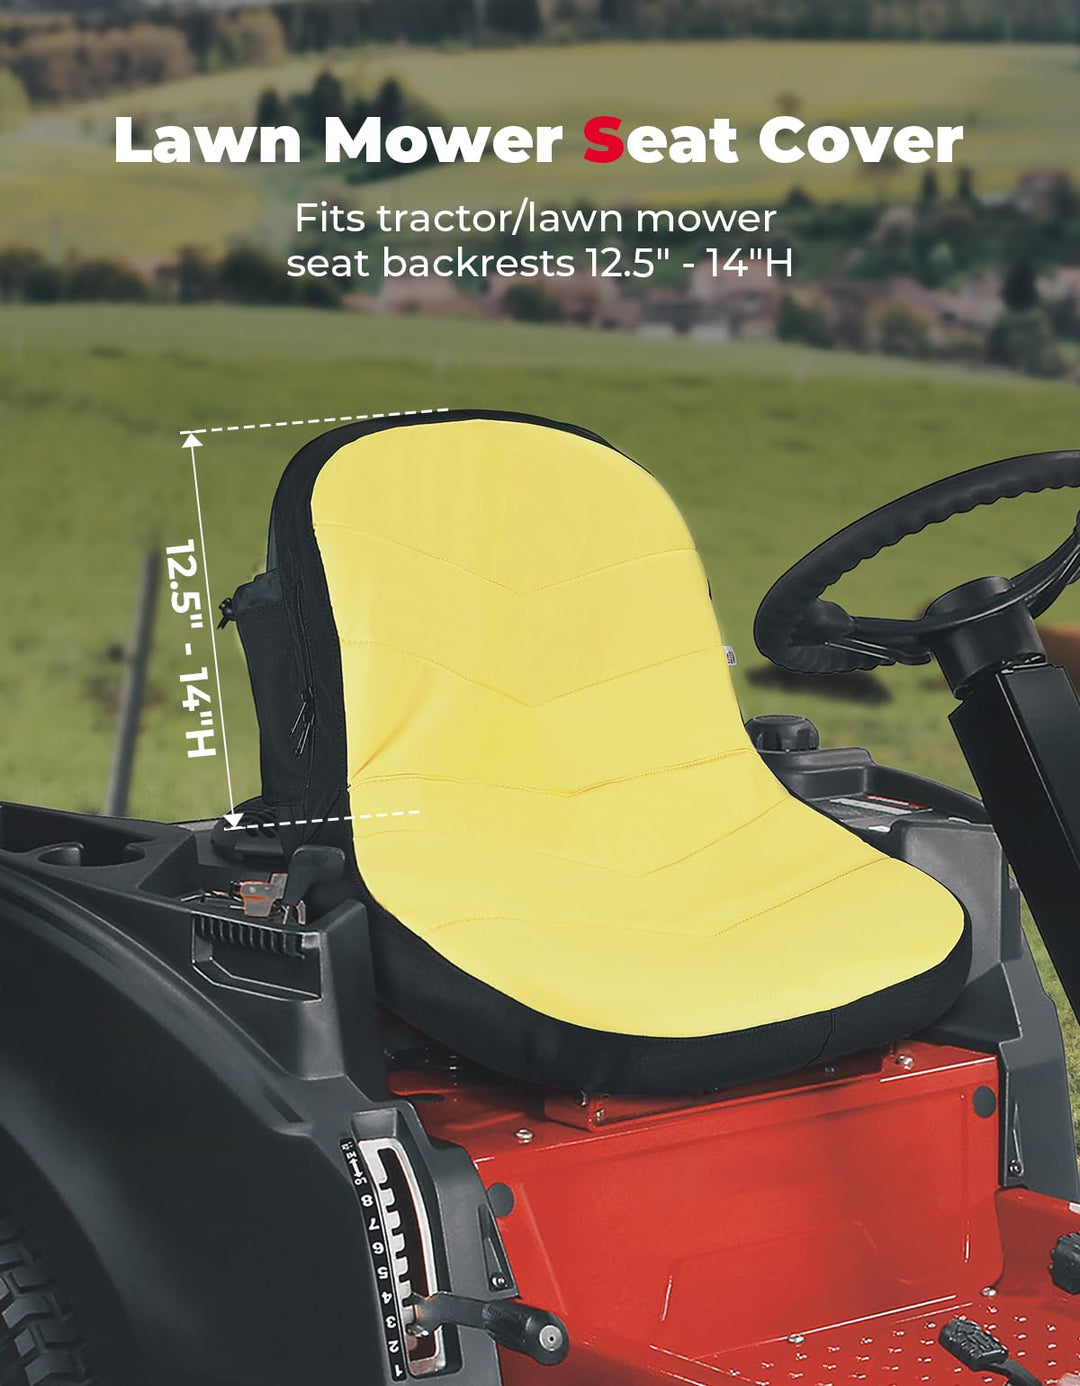 Universal Riding Lawn Mower Seat Cover For 12.5"-14" High Seats - Kemimoto